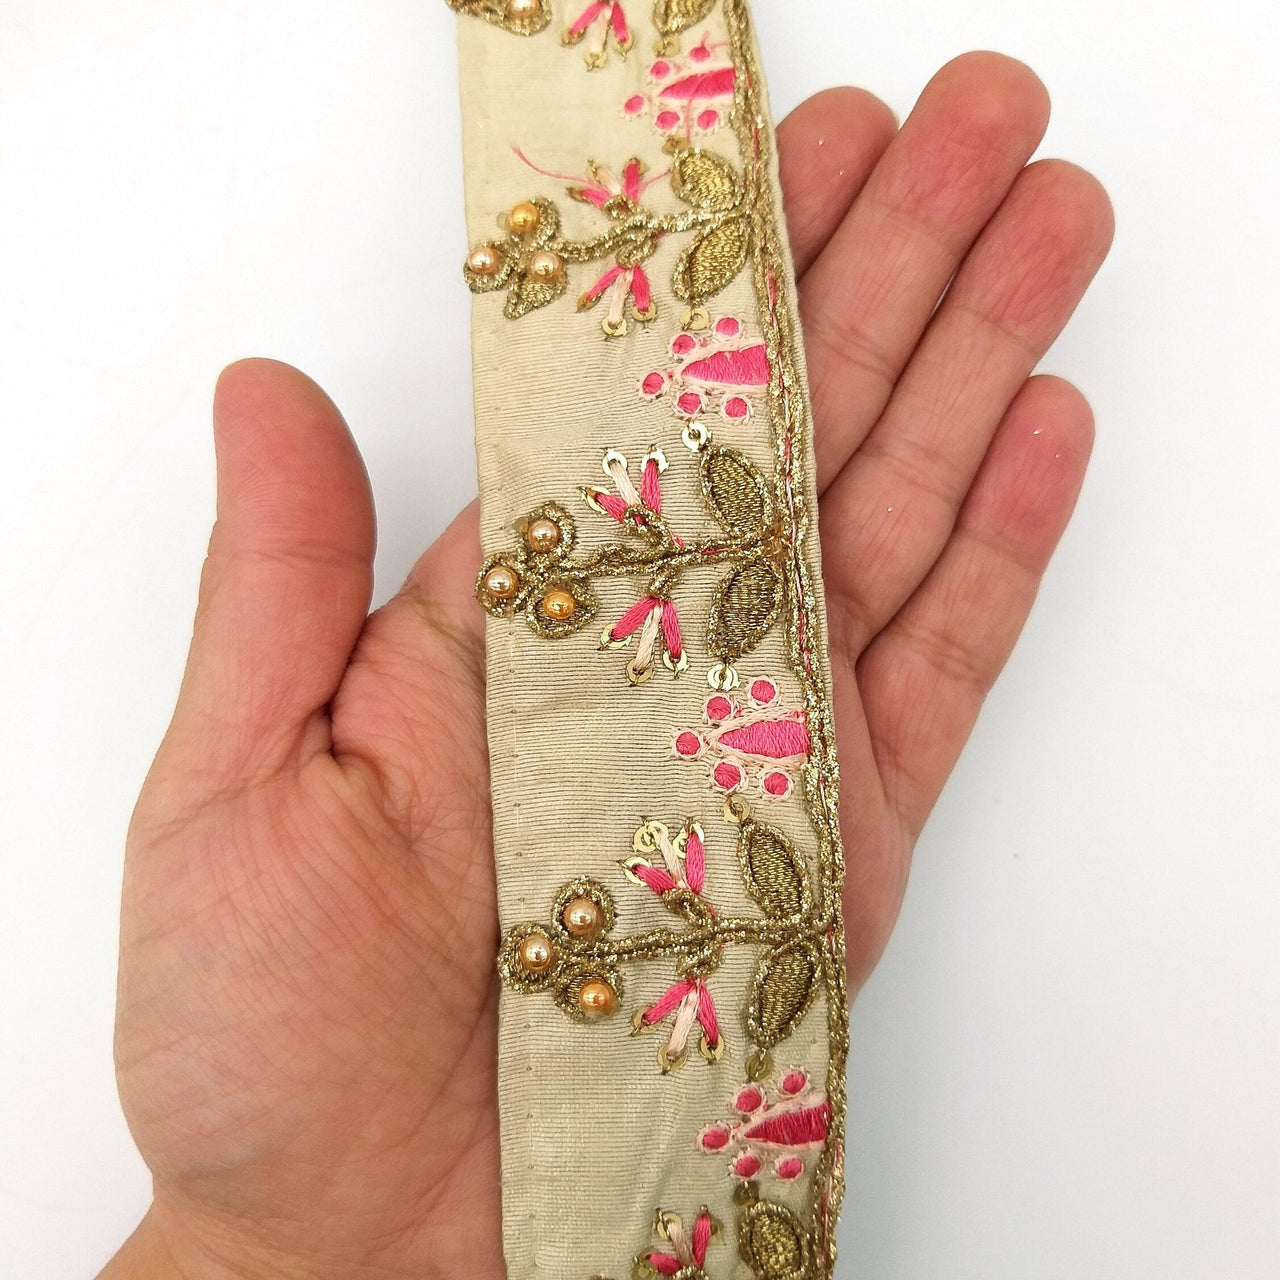 Beige Art Silk Trim In Pink And Gold Embroidery, Approx. 35mm wide, Decorative Trim